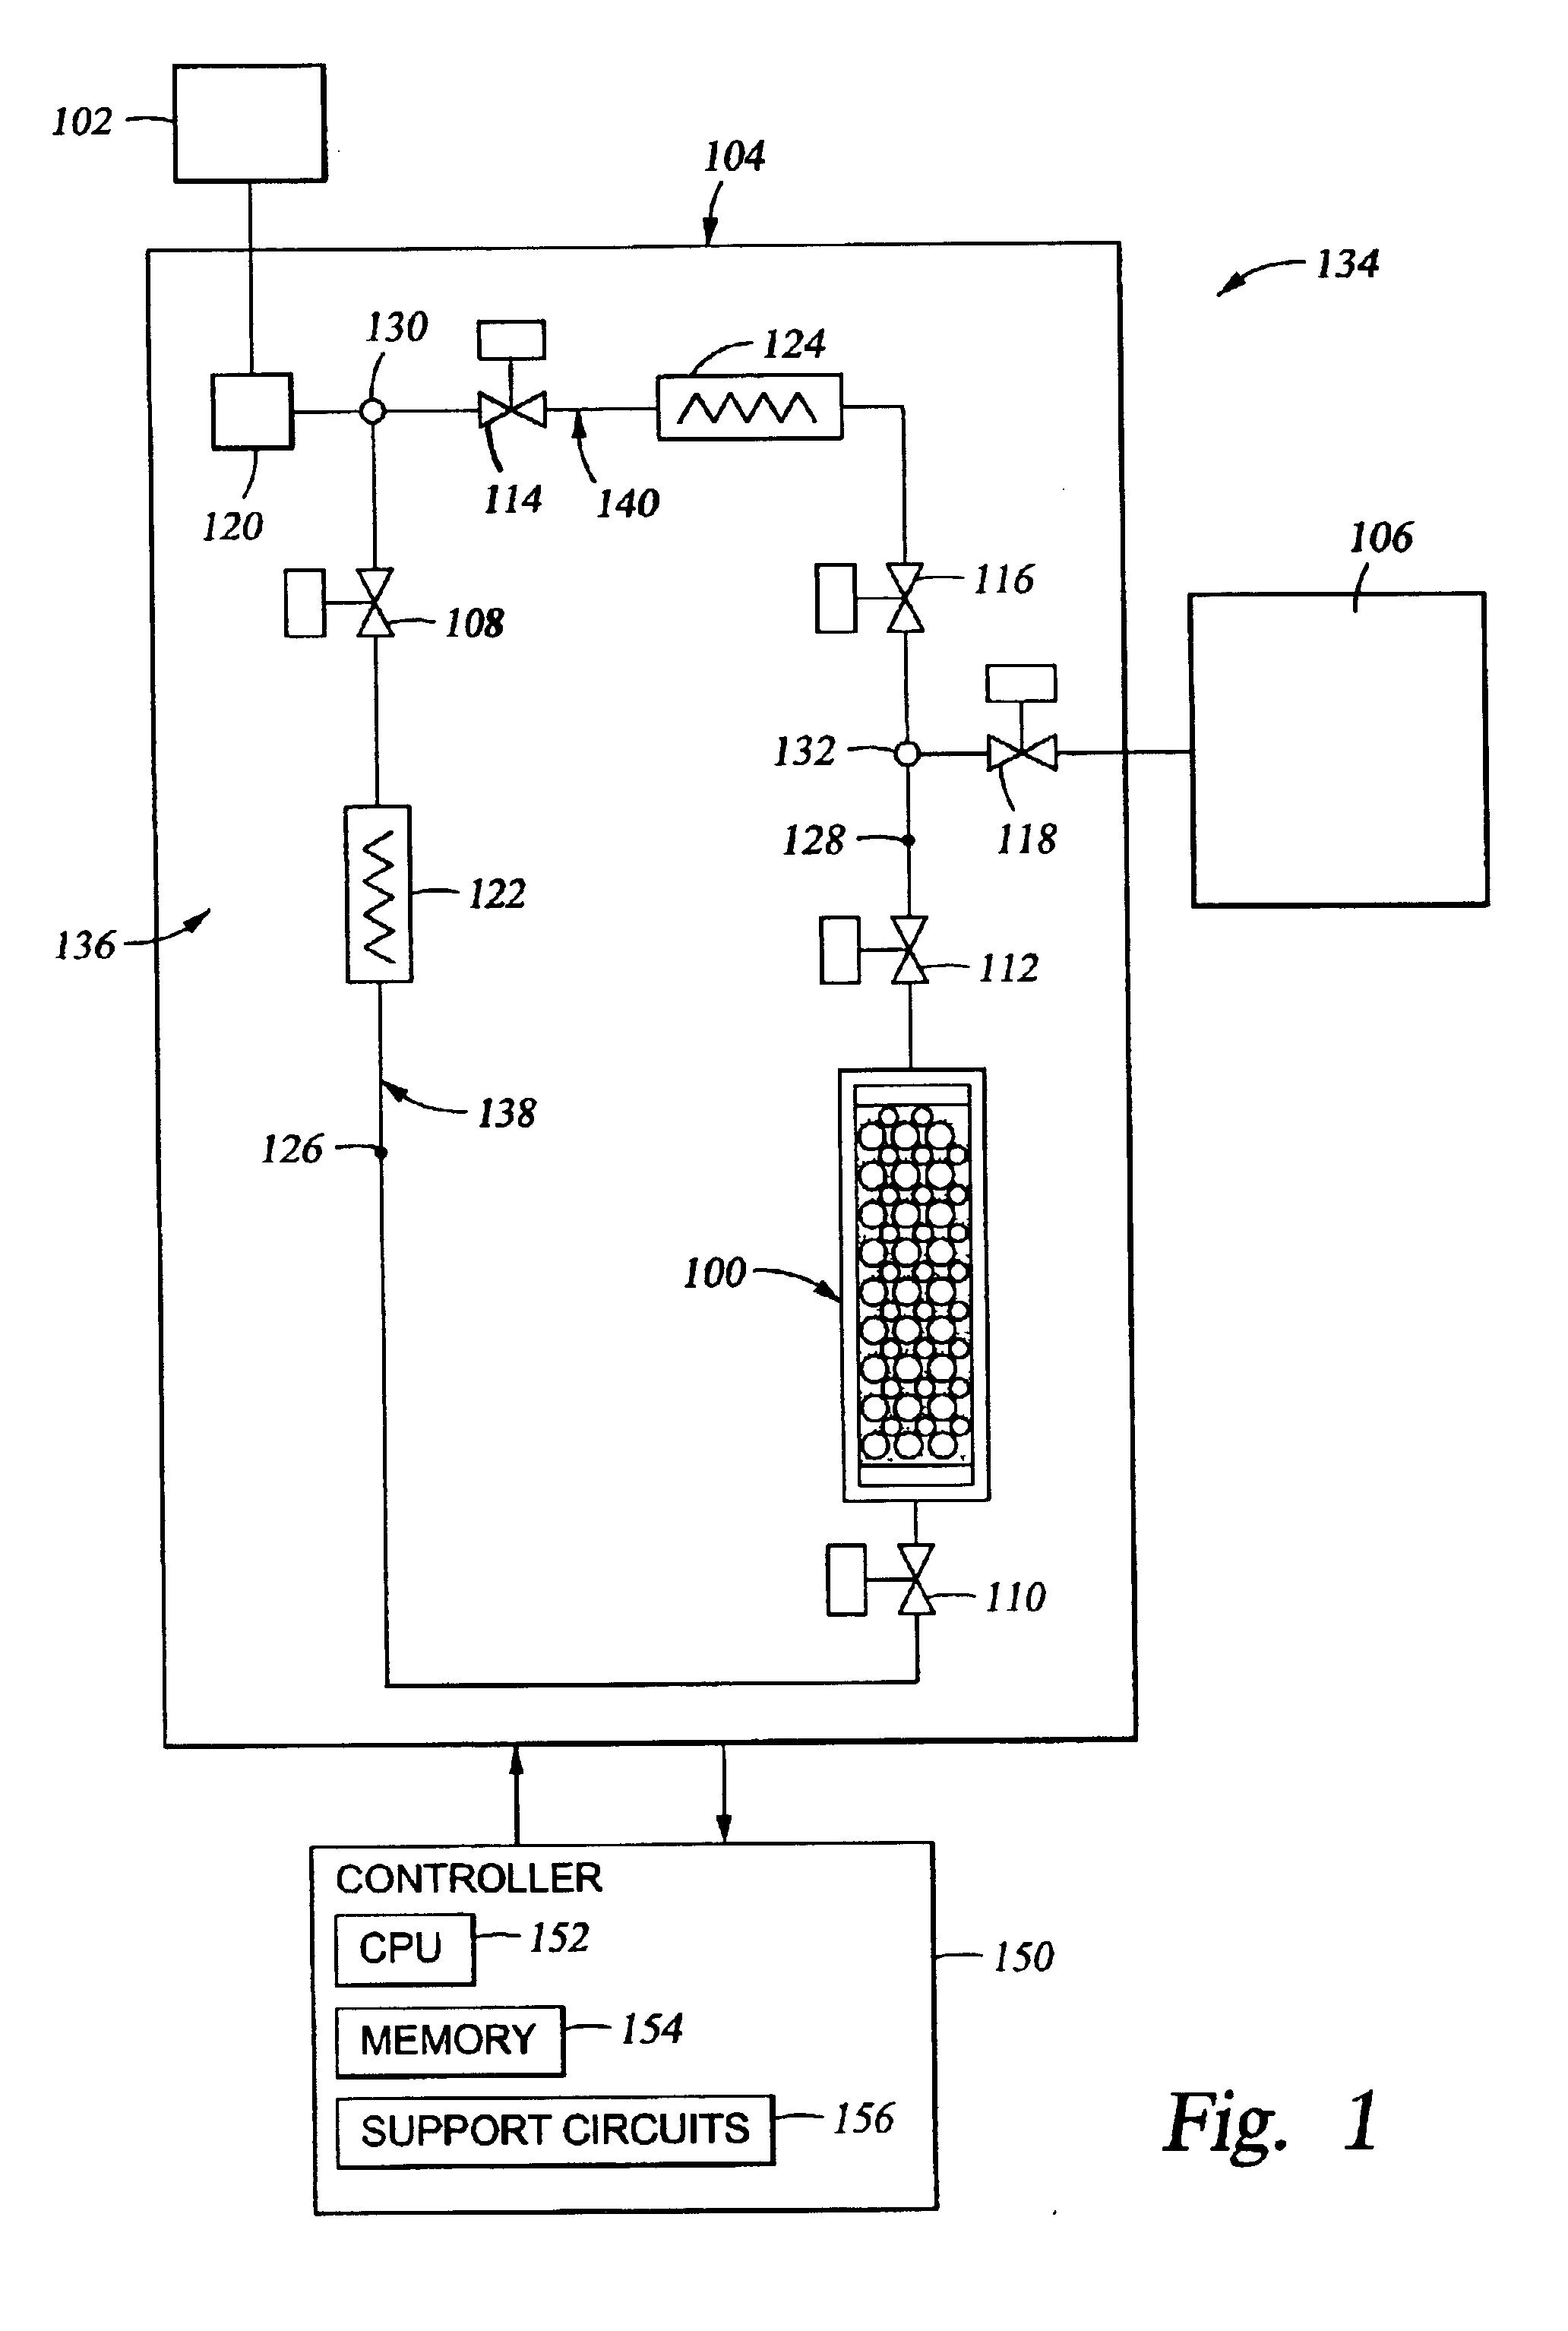 Method and apparatus for generating gas to a processing chamber